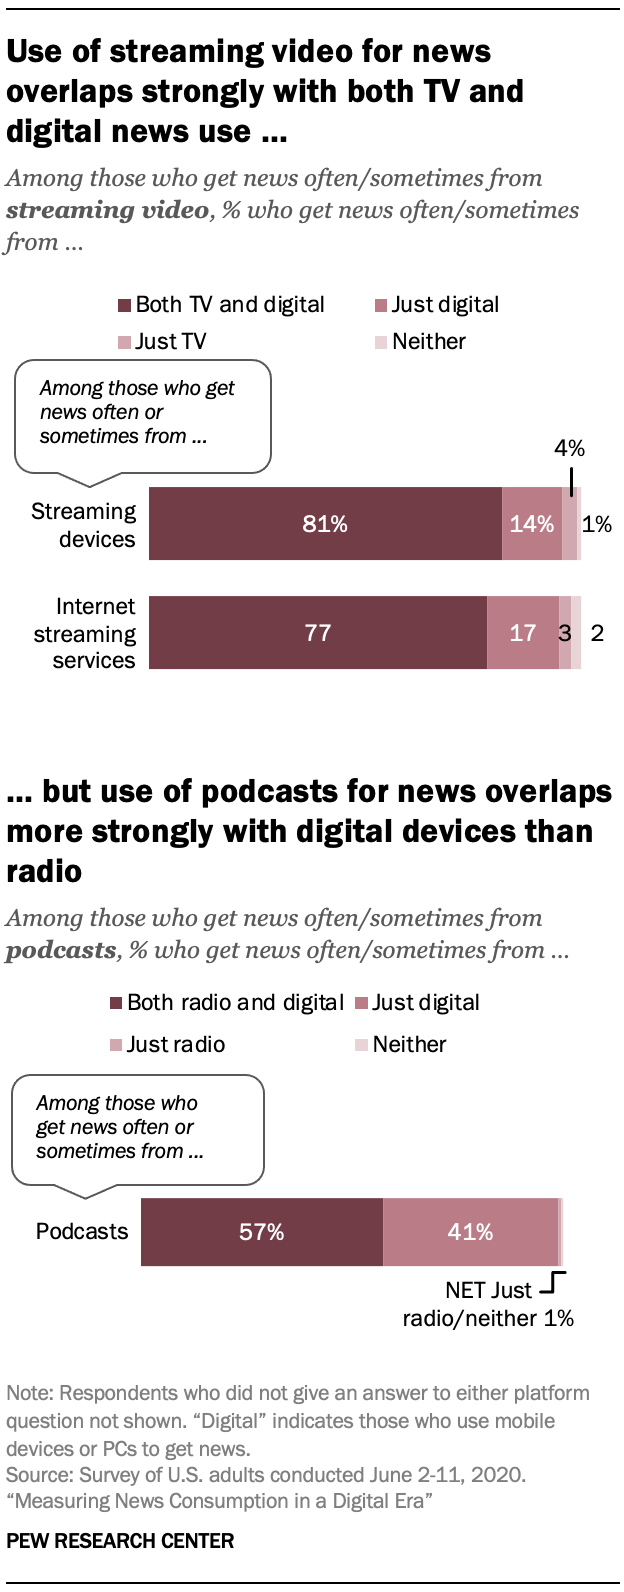 Use of streaming video for news overlaps strongly with both TV and digital news use …but use of podcasts for news overlaps more strongly with digital devices than radio